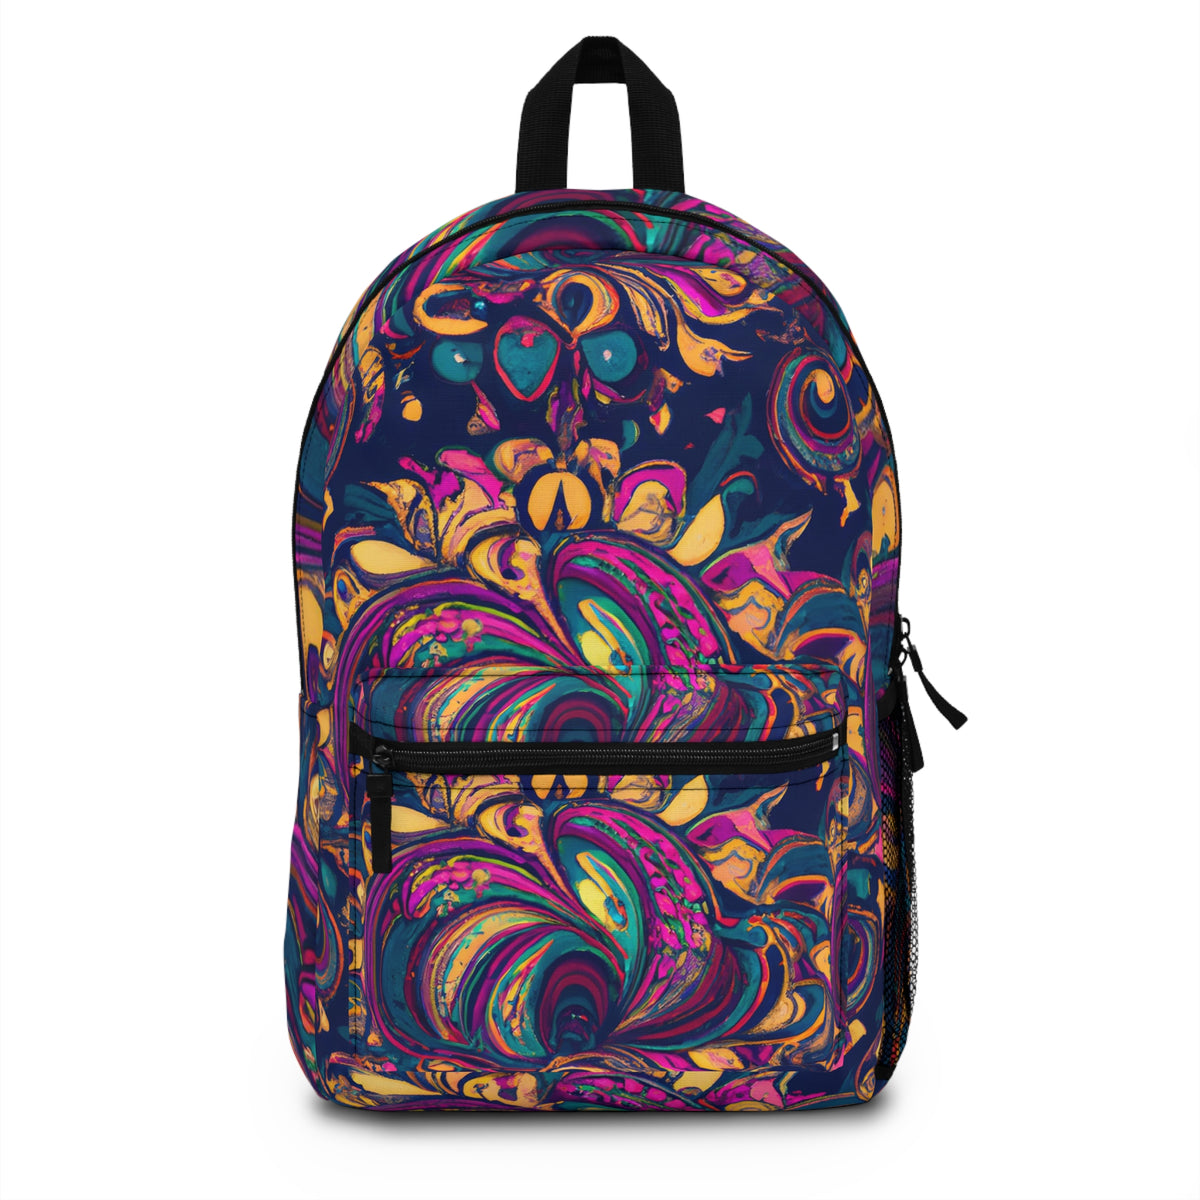 SilvieGlamour - Gay-Inspired Backpack